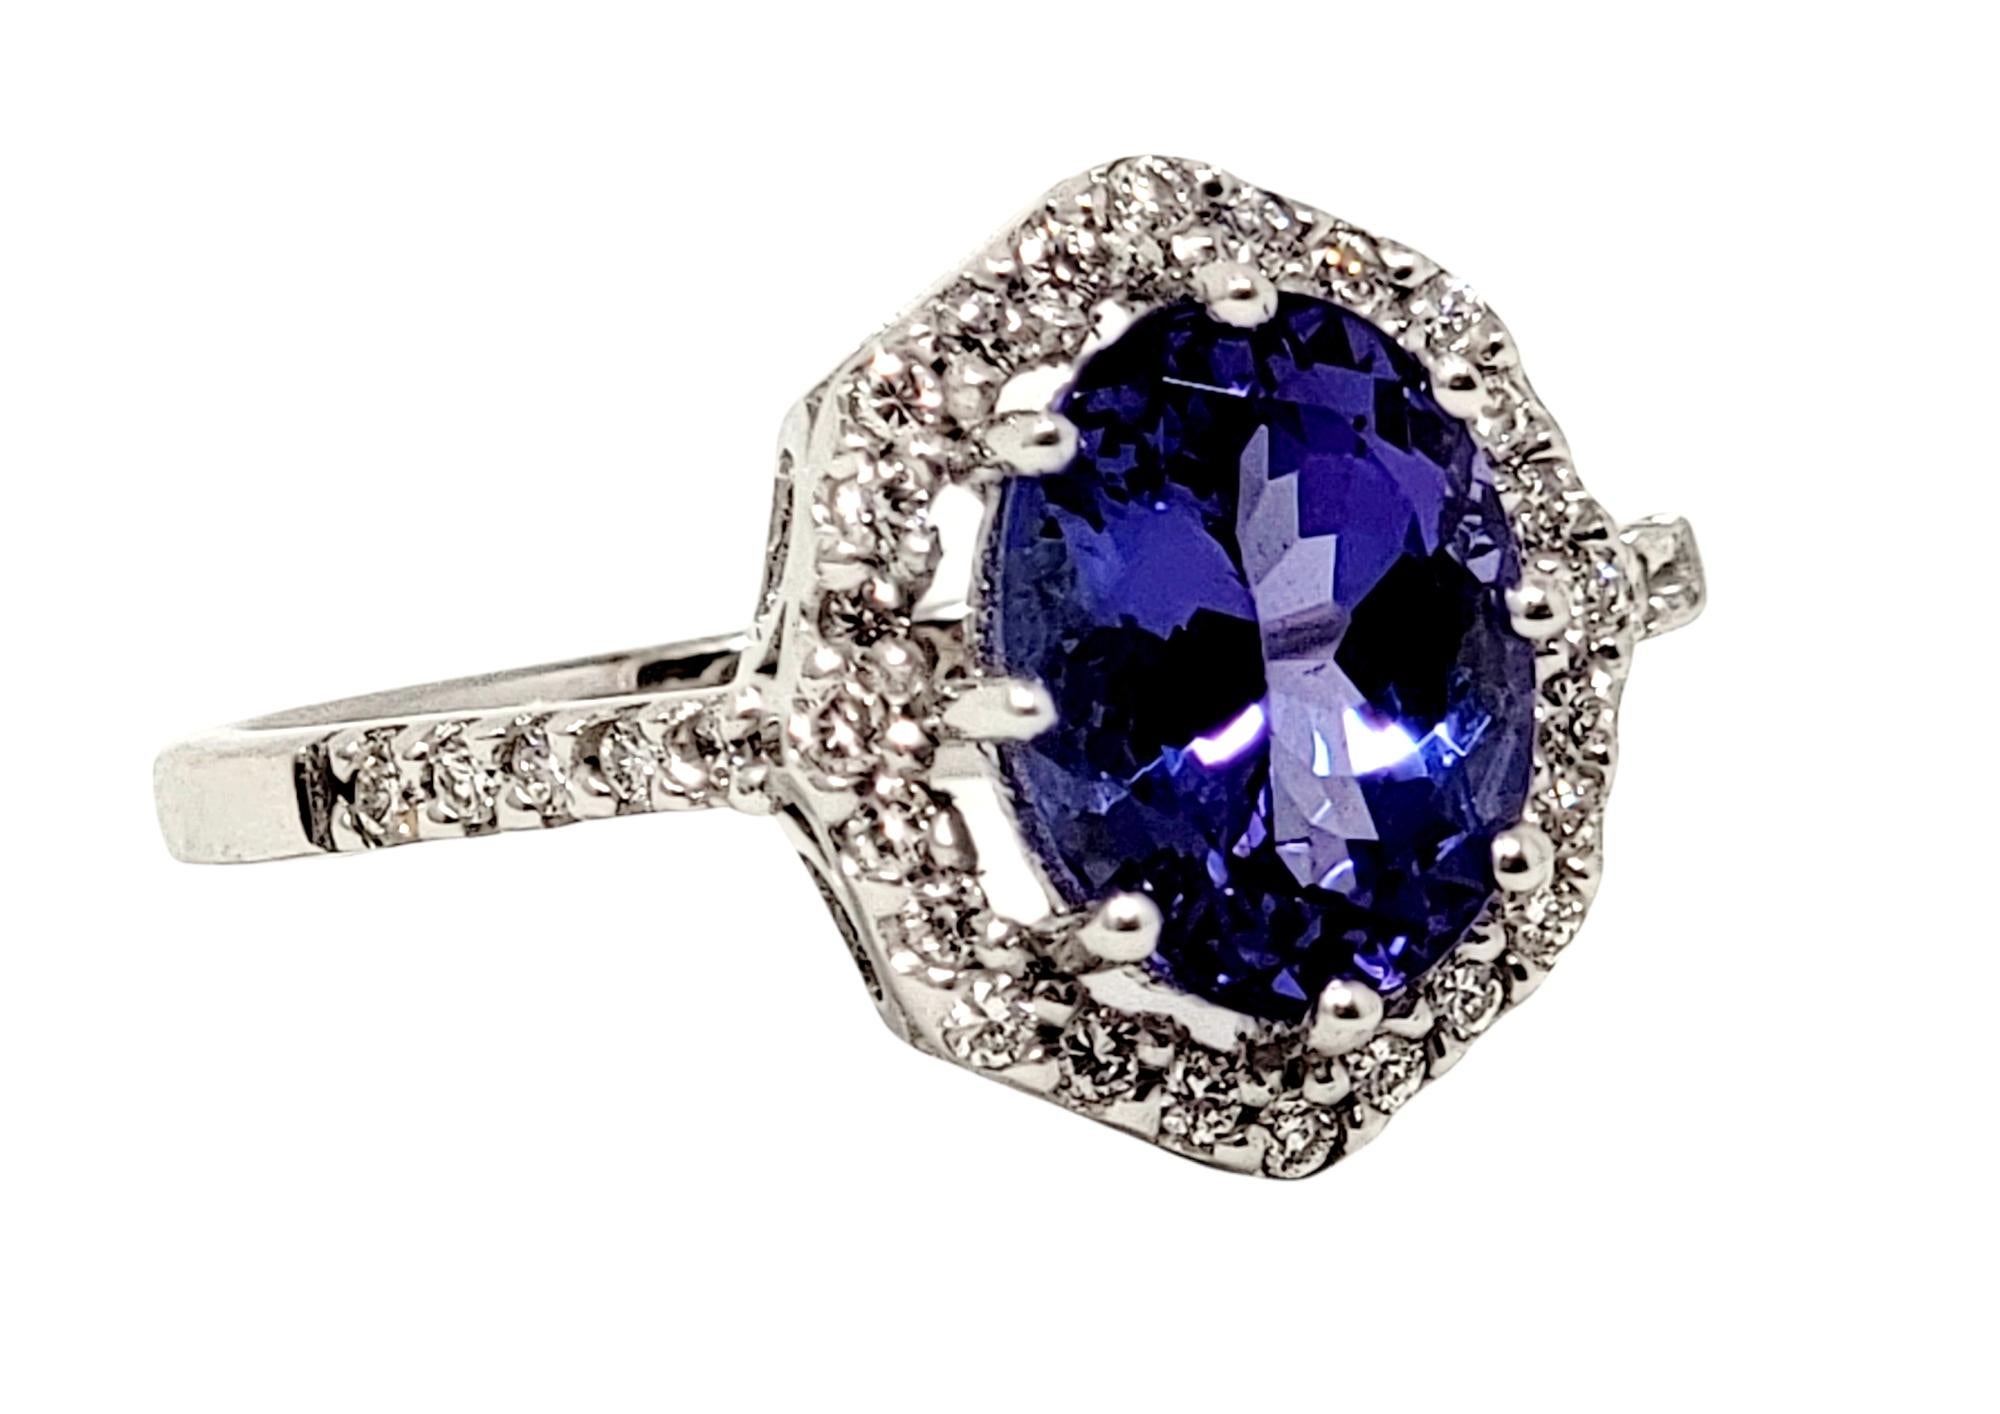 Ring size: 6.75

This stunning estate tanzanite and diamond halo ring showcases the bold color of tanzanite perfectly. 

Ring size: 6.75
Metal: 18K White Gold
Weight: 3.65 grams
Height: 6.35 mm
Natural Tanzanite: 1.66 ctw
Sapphire cut: Oval